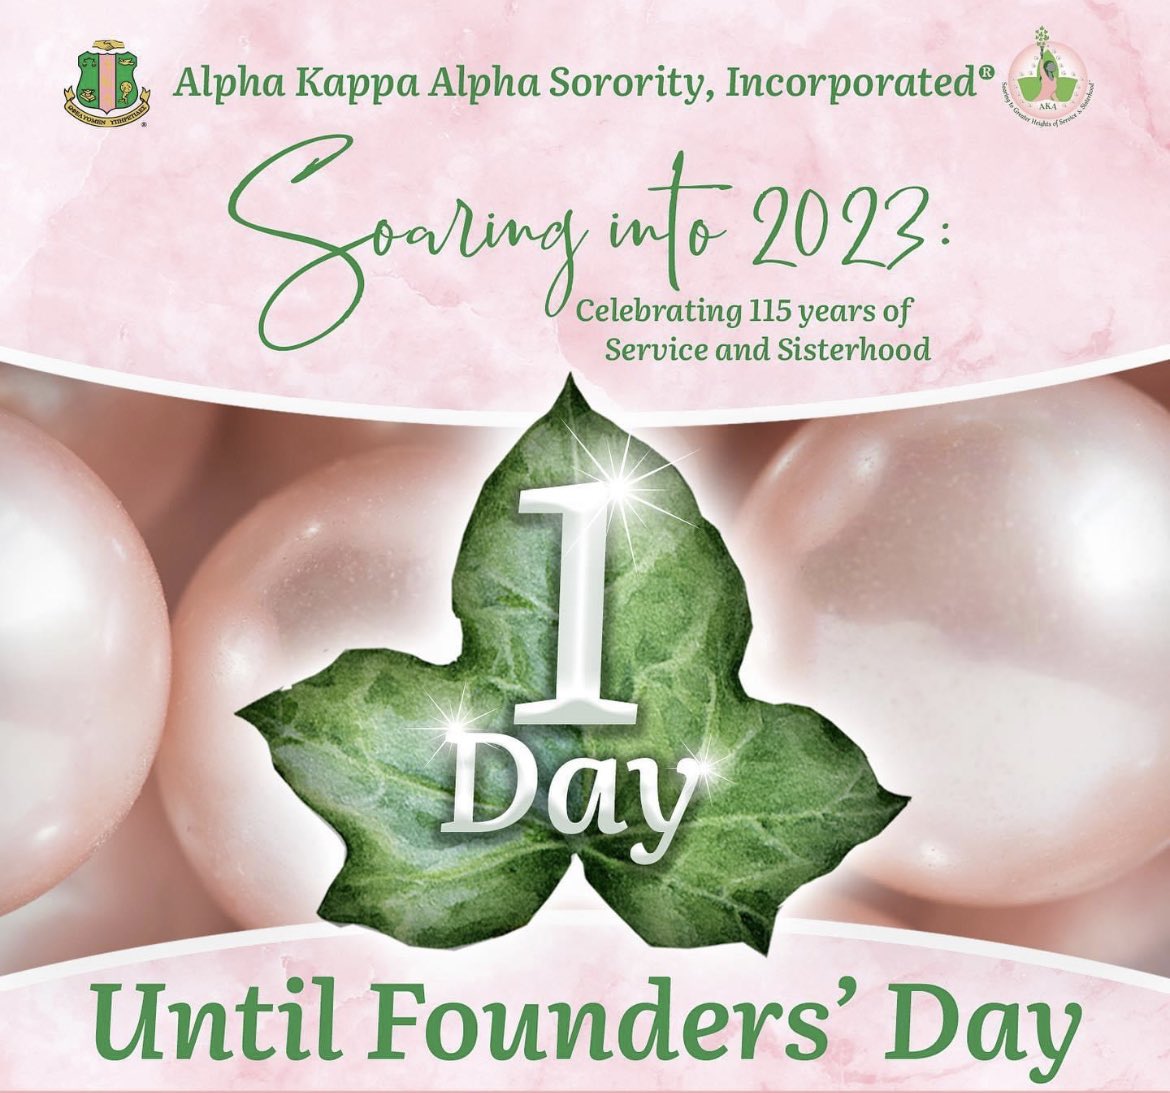 In less than 24 hours, we’ll celebrate our 115th Founders’ Day!! Get ready.💗💚#SoaringInto2023 #January15 #AKA1908